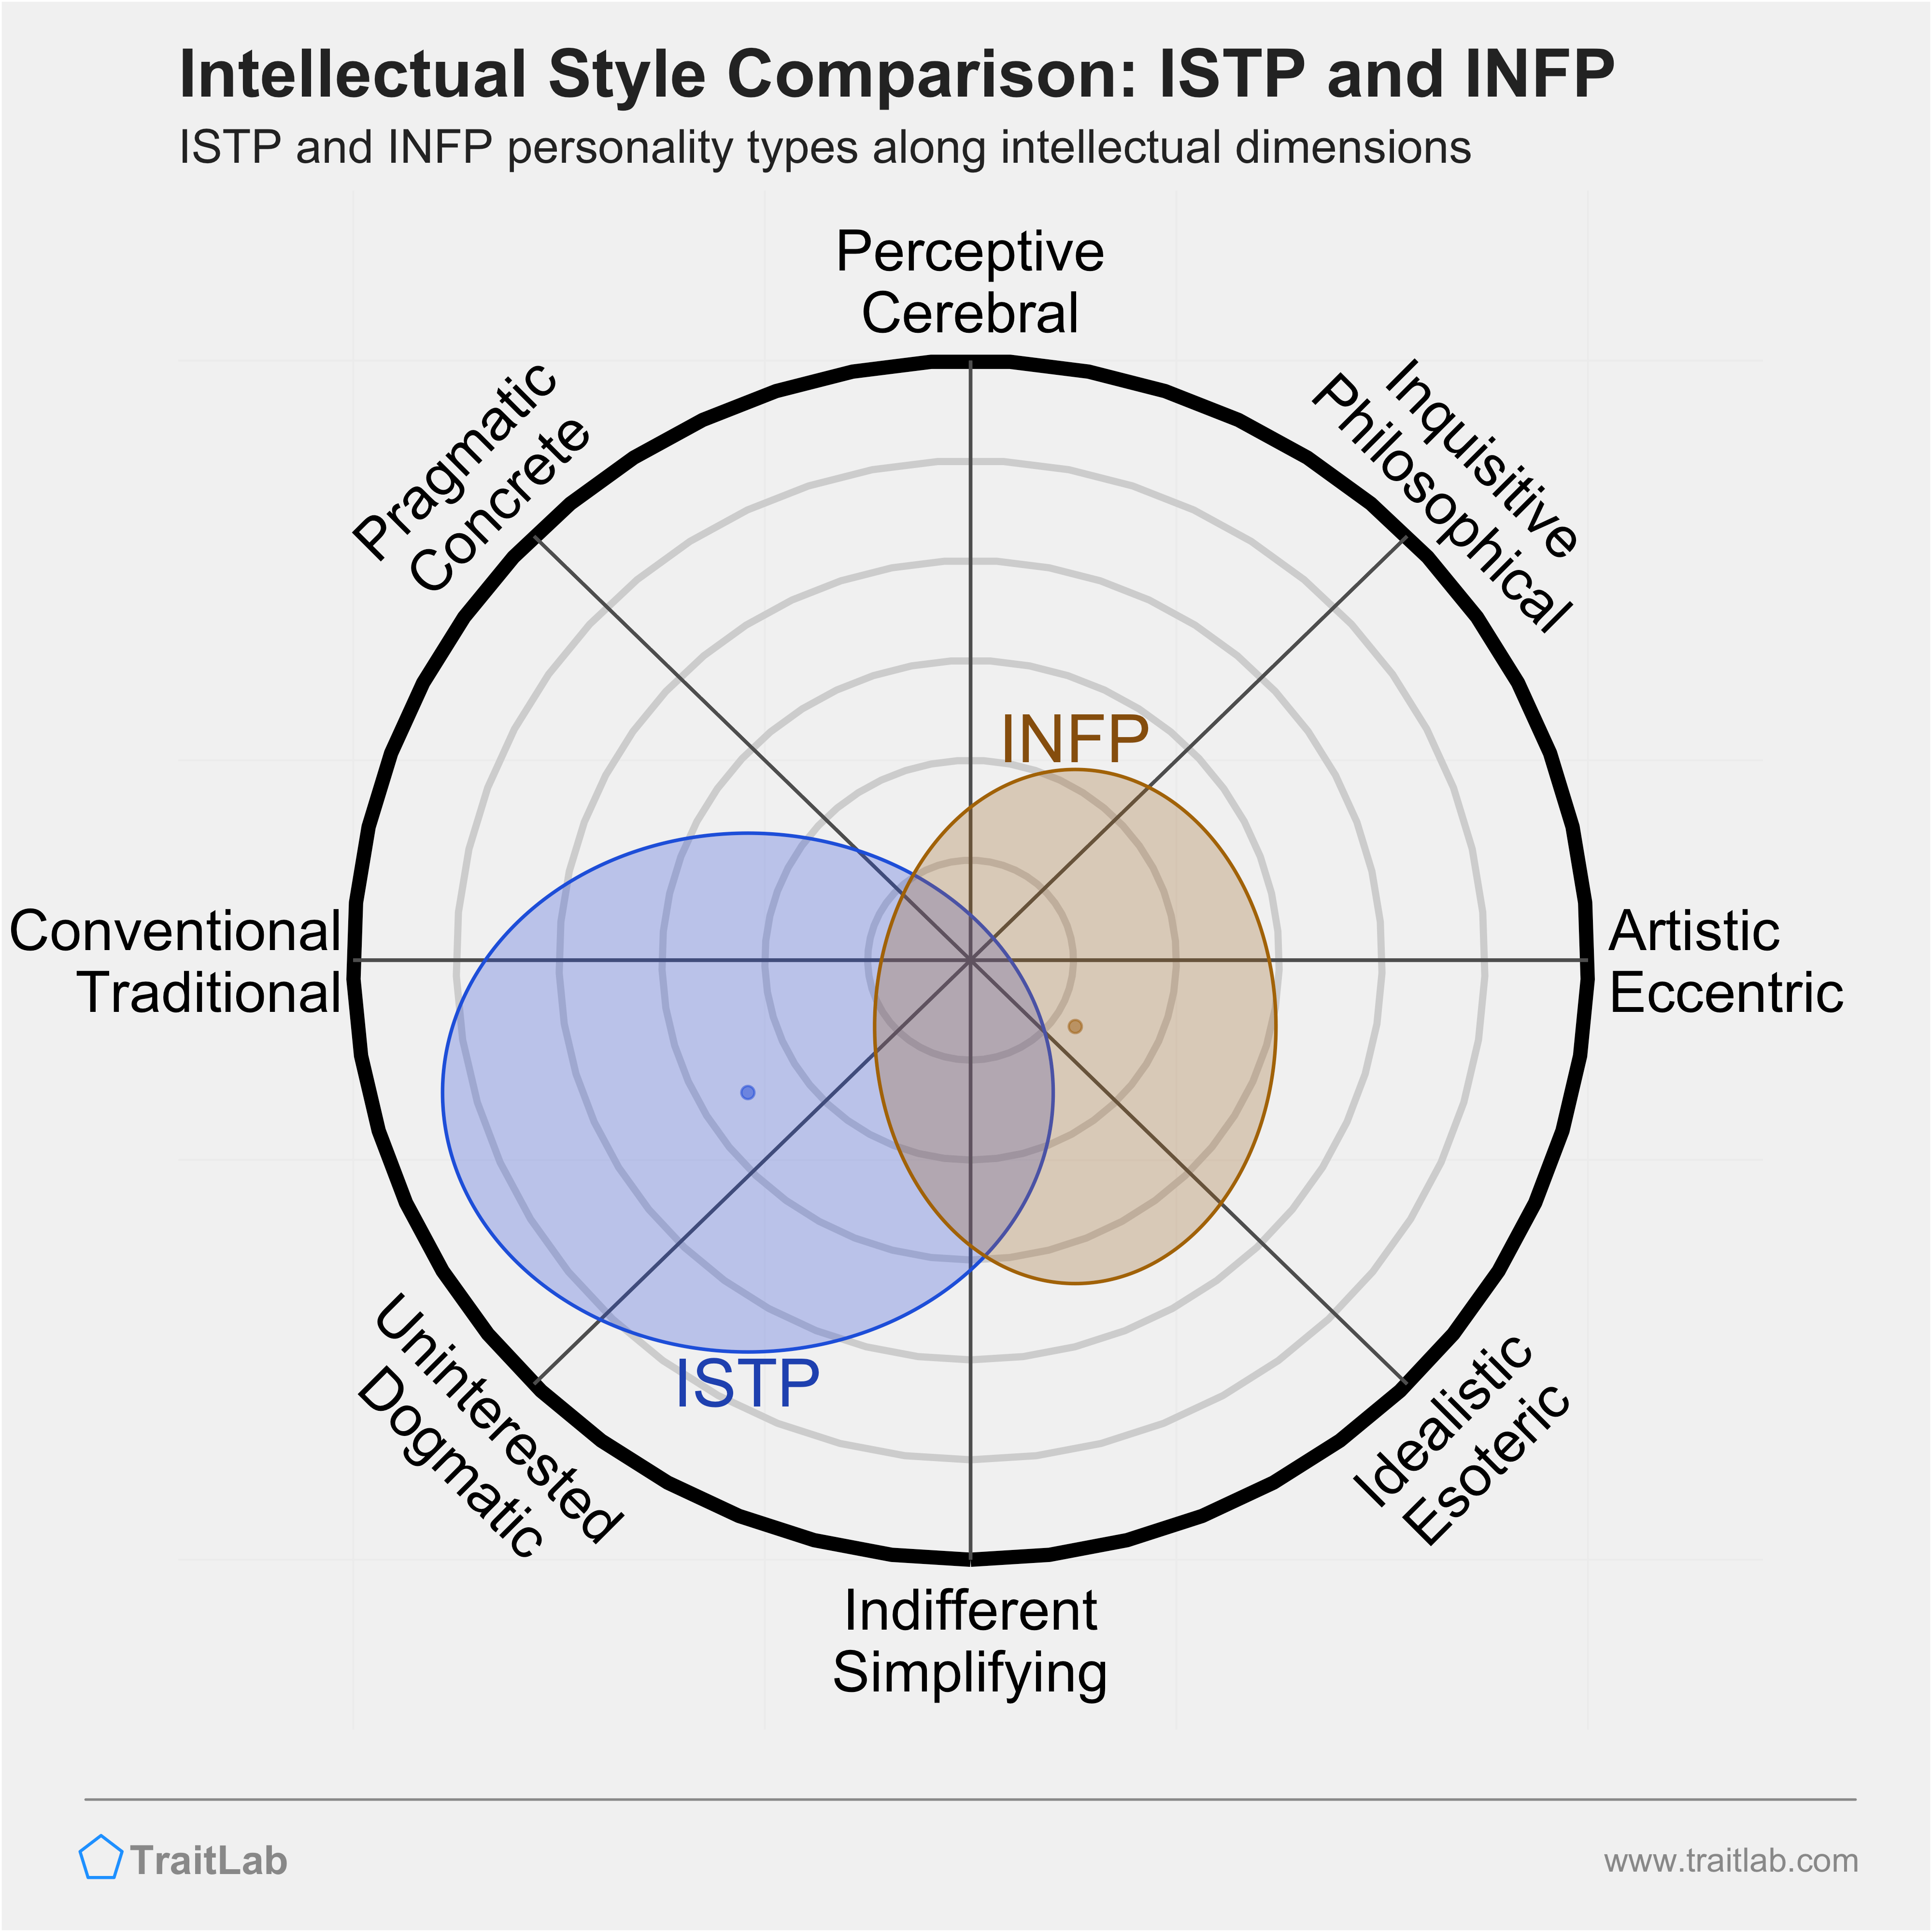 ISTP and INFP comparison across intellectual dimensions